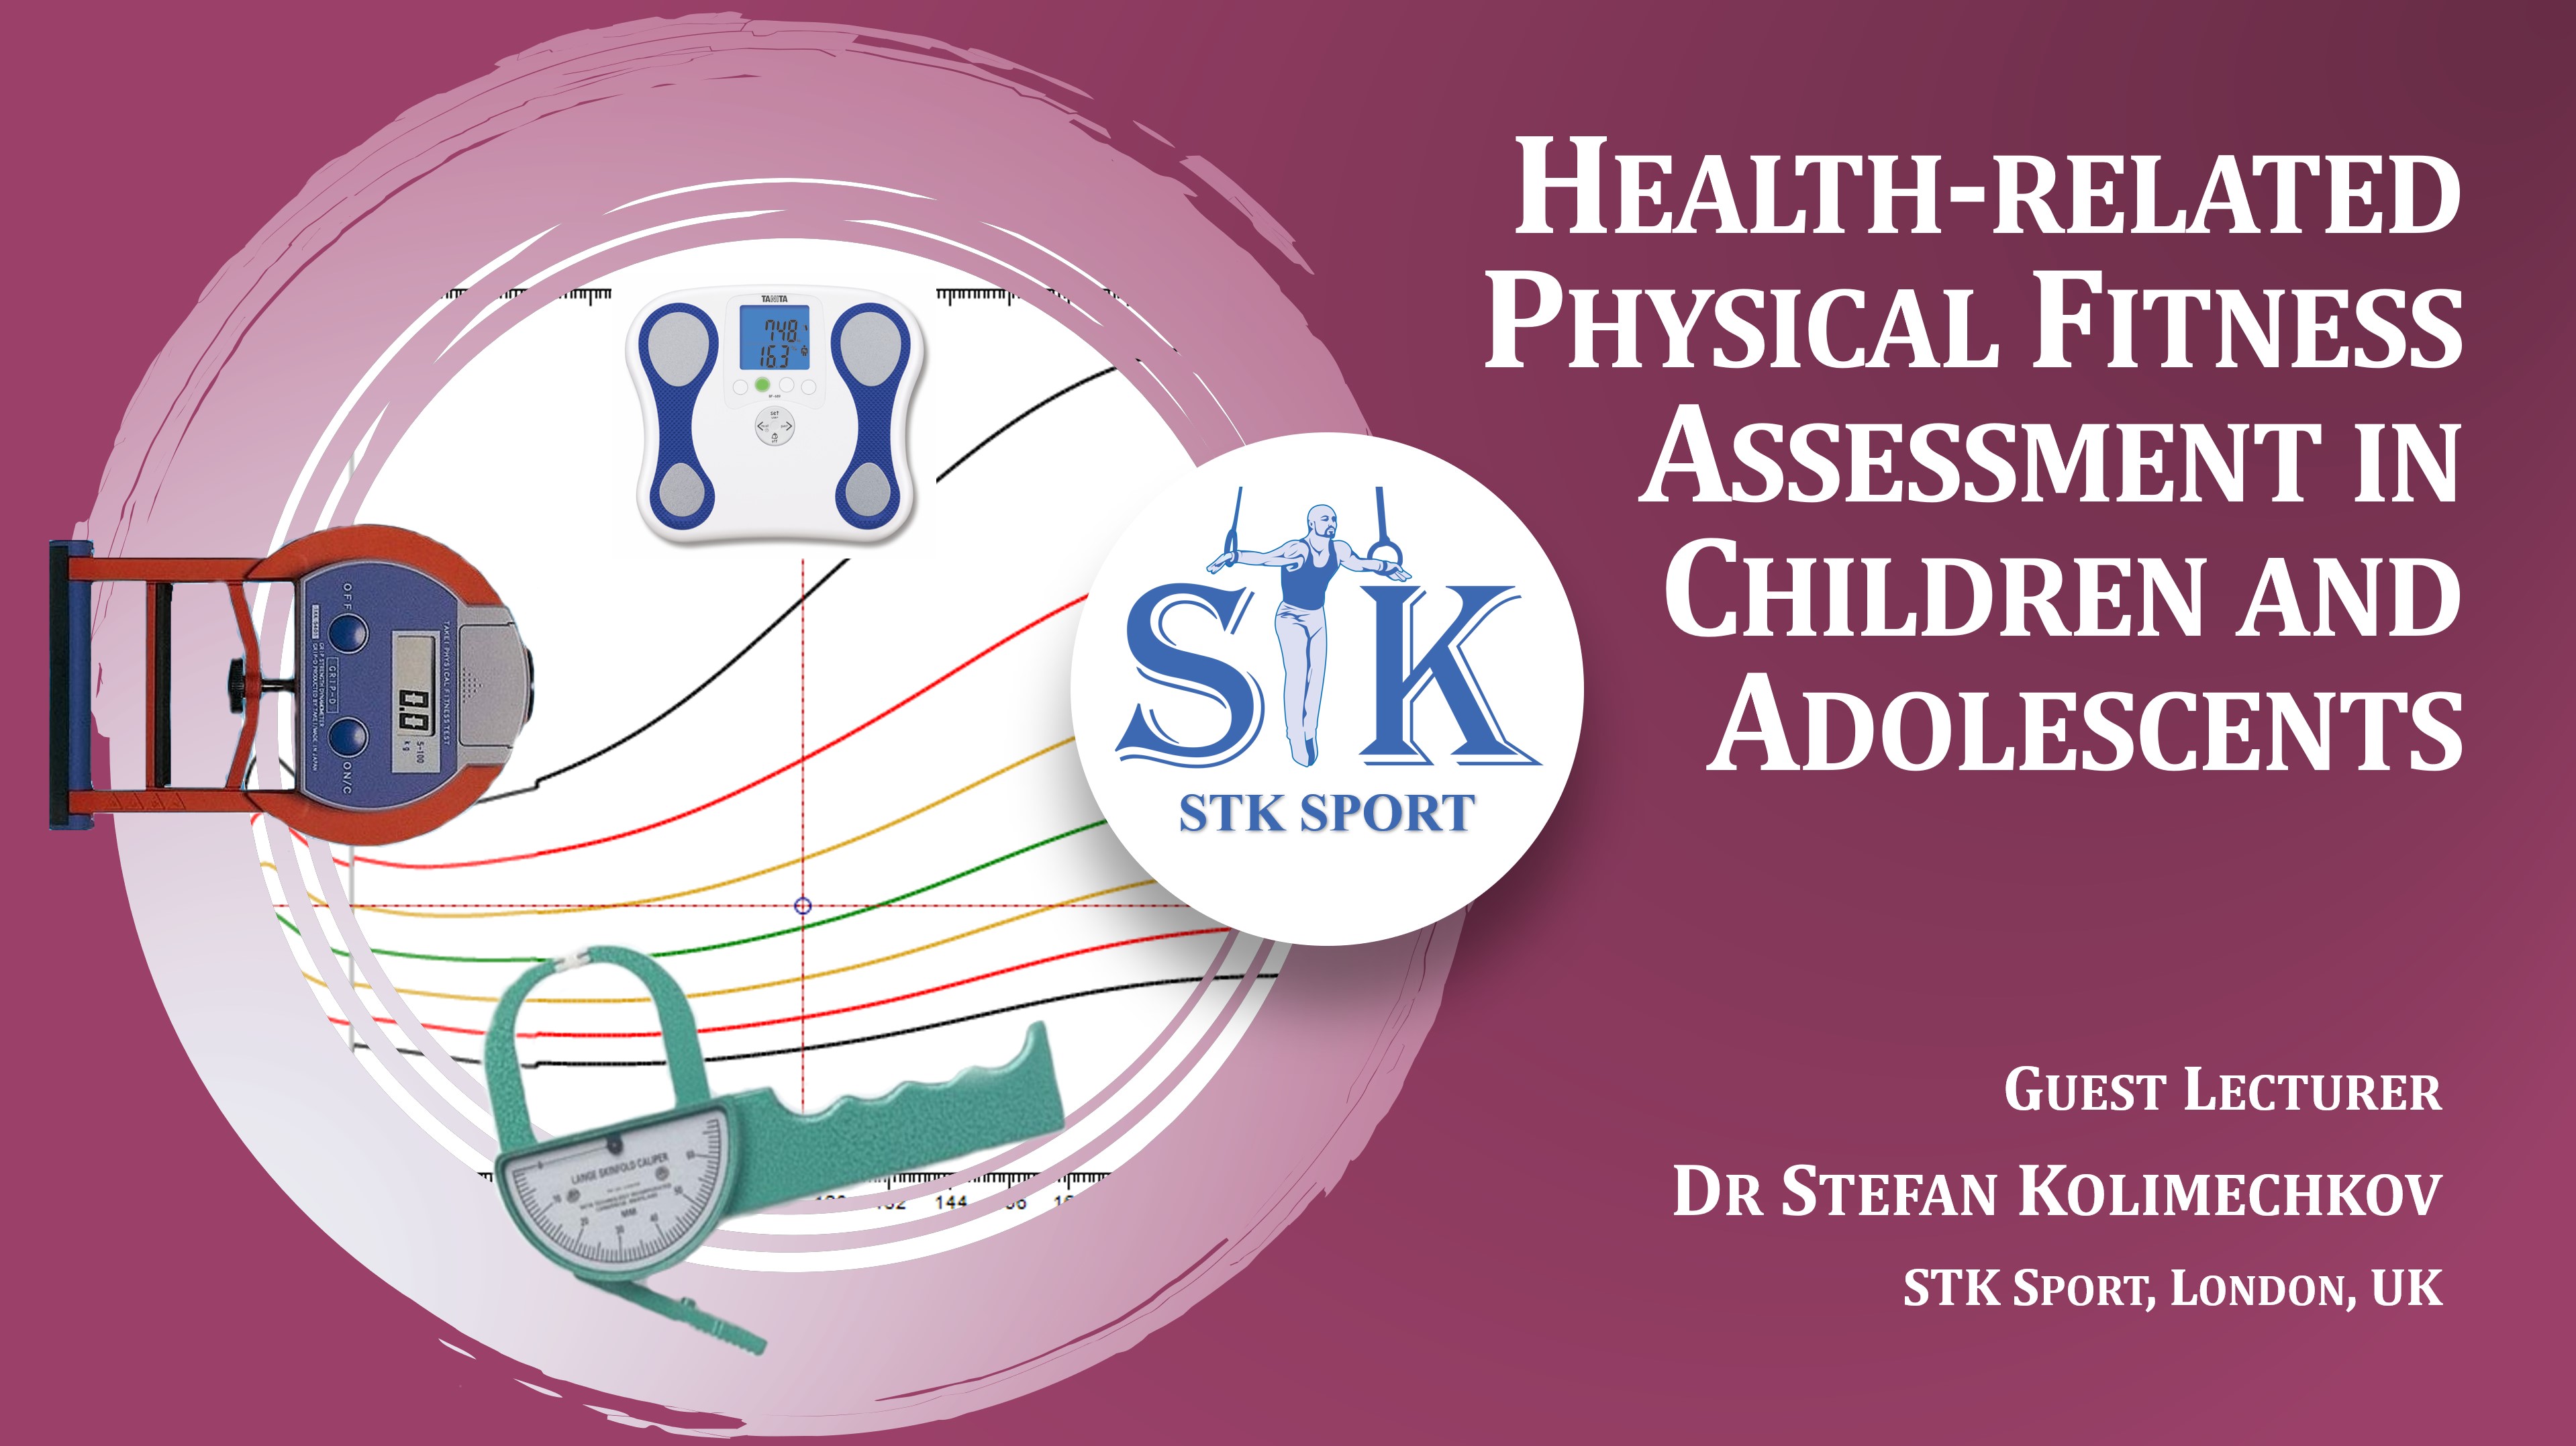 Virtual Lecture on the topic of Health Related Physical Fitness Assessment in Children and Adolescents